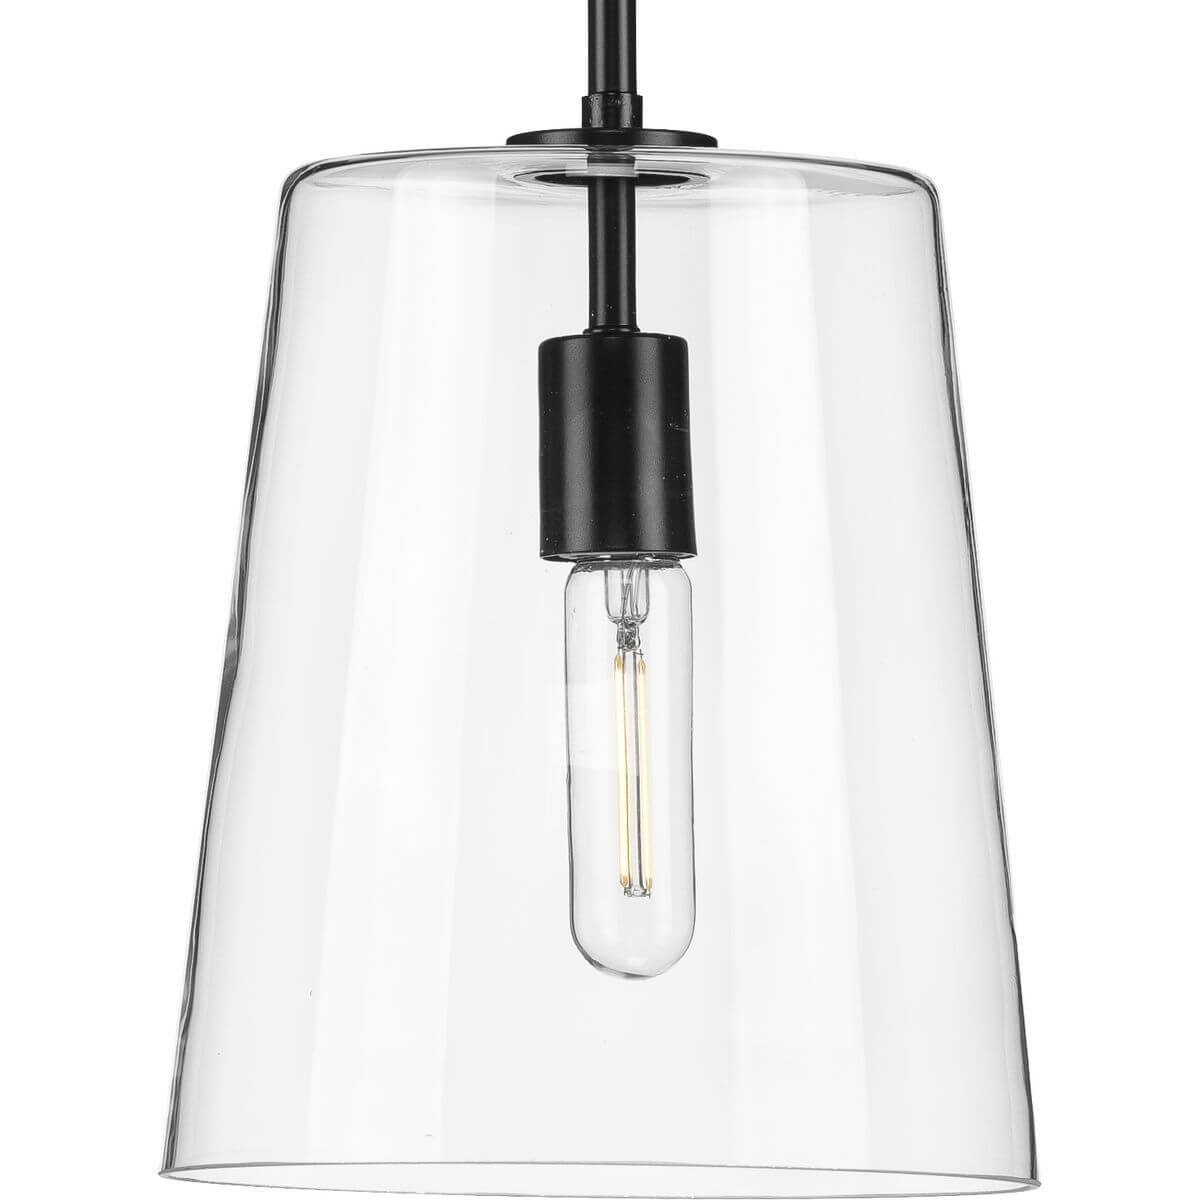 Progress Lighting Clarion 1 Light 9 inch Pendant in Matte Black with Clear Glass P500241-031